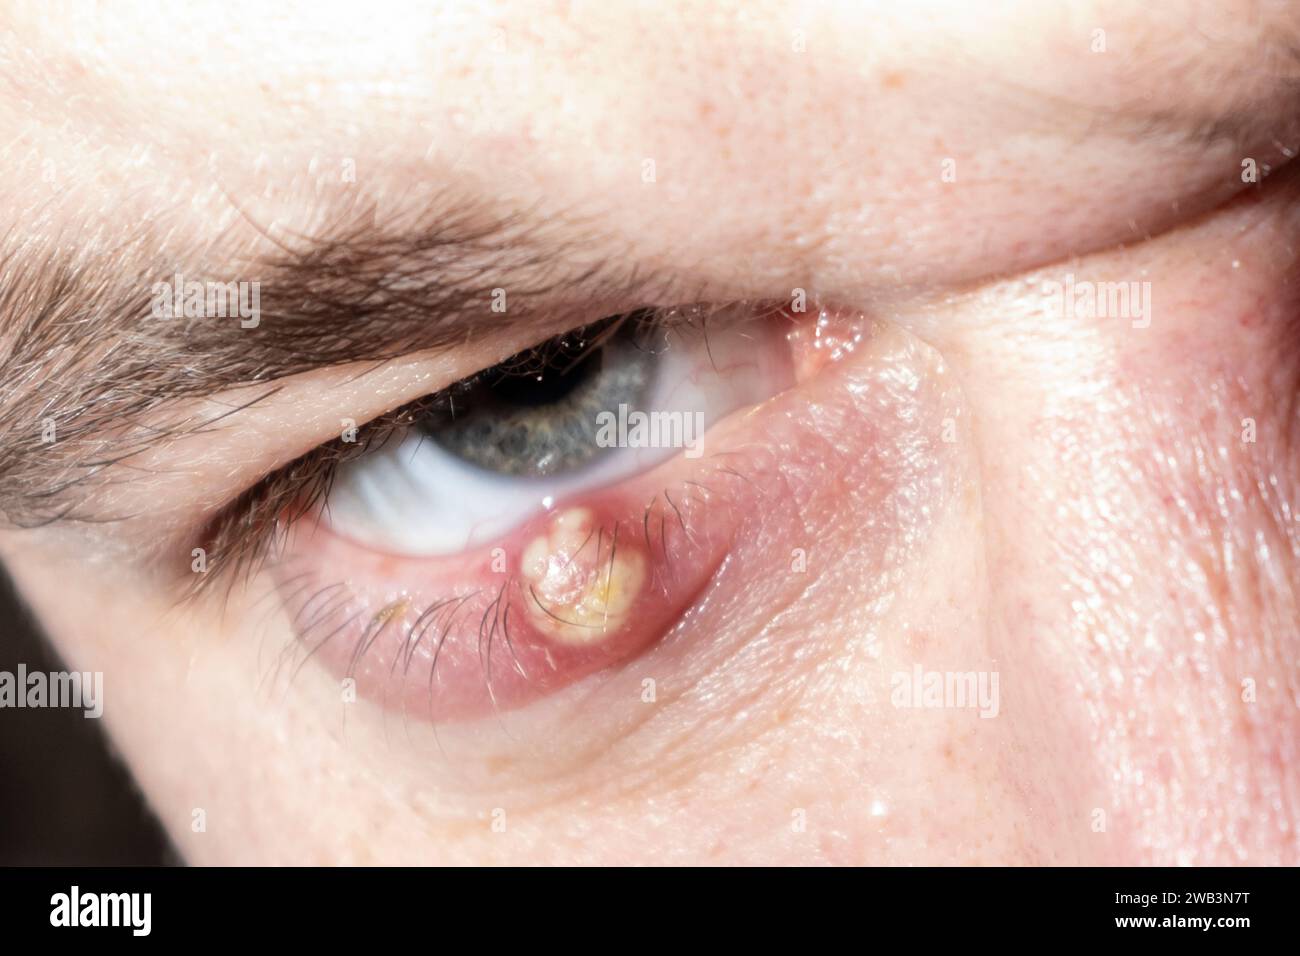 Eye of a guy with stye close-up. Acute red purulent inflammation of the hair follicle of the eyelashes of a man. Stock Photo